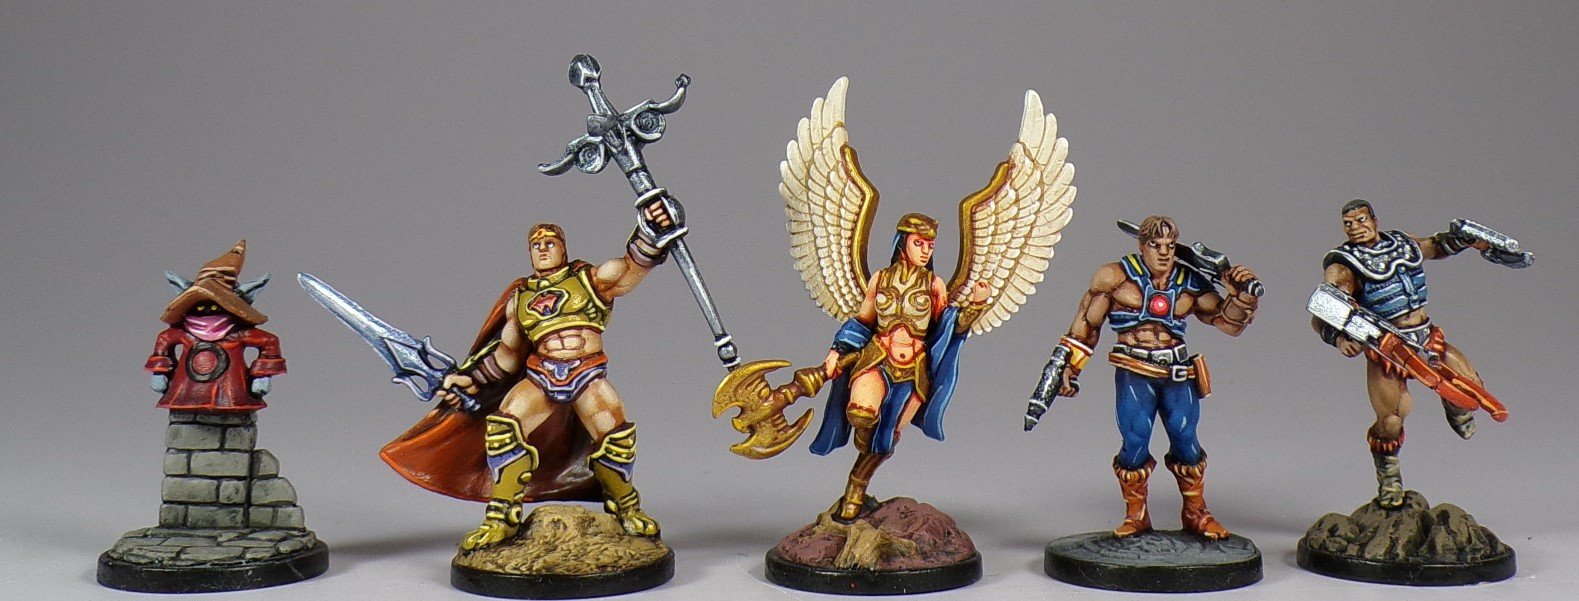 Paintedfigs Masters of the Universe Clash for Eternia miniature painting service (27).jpg